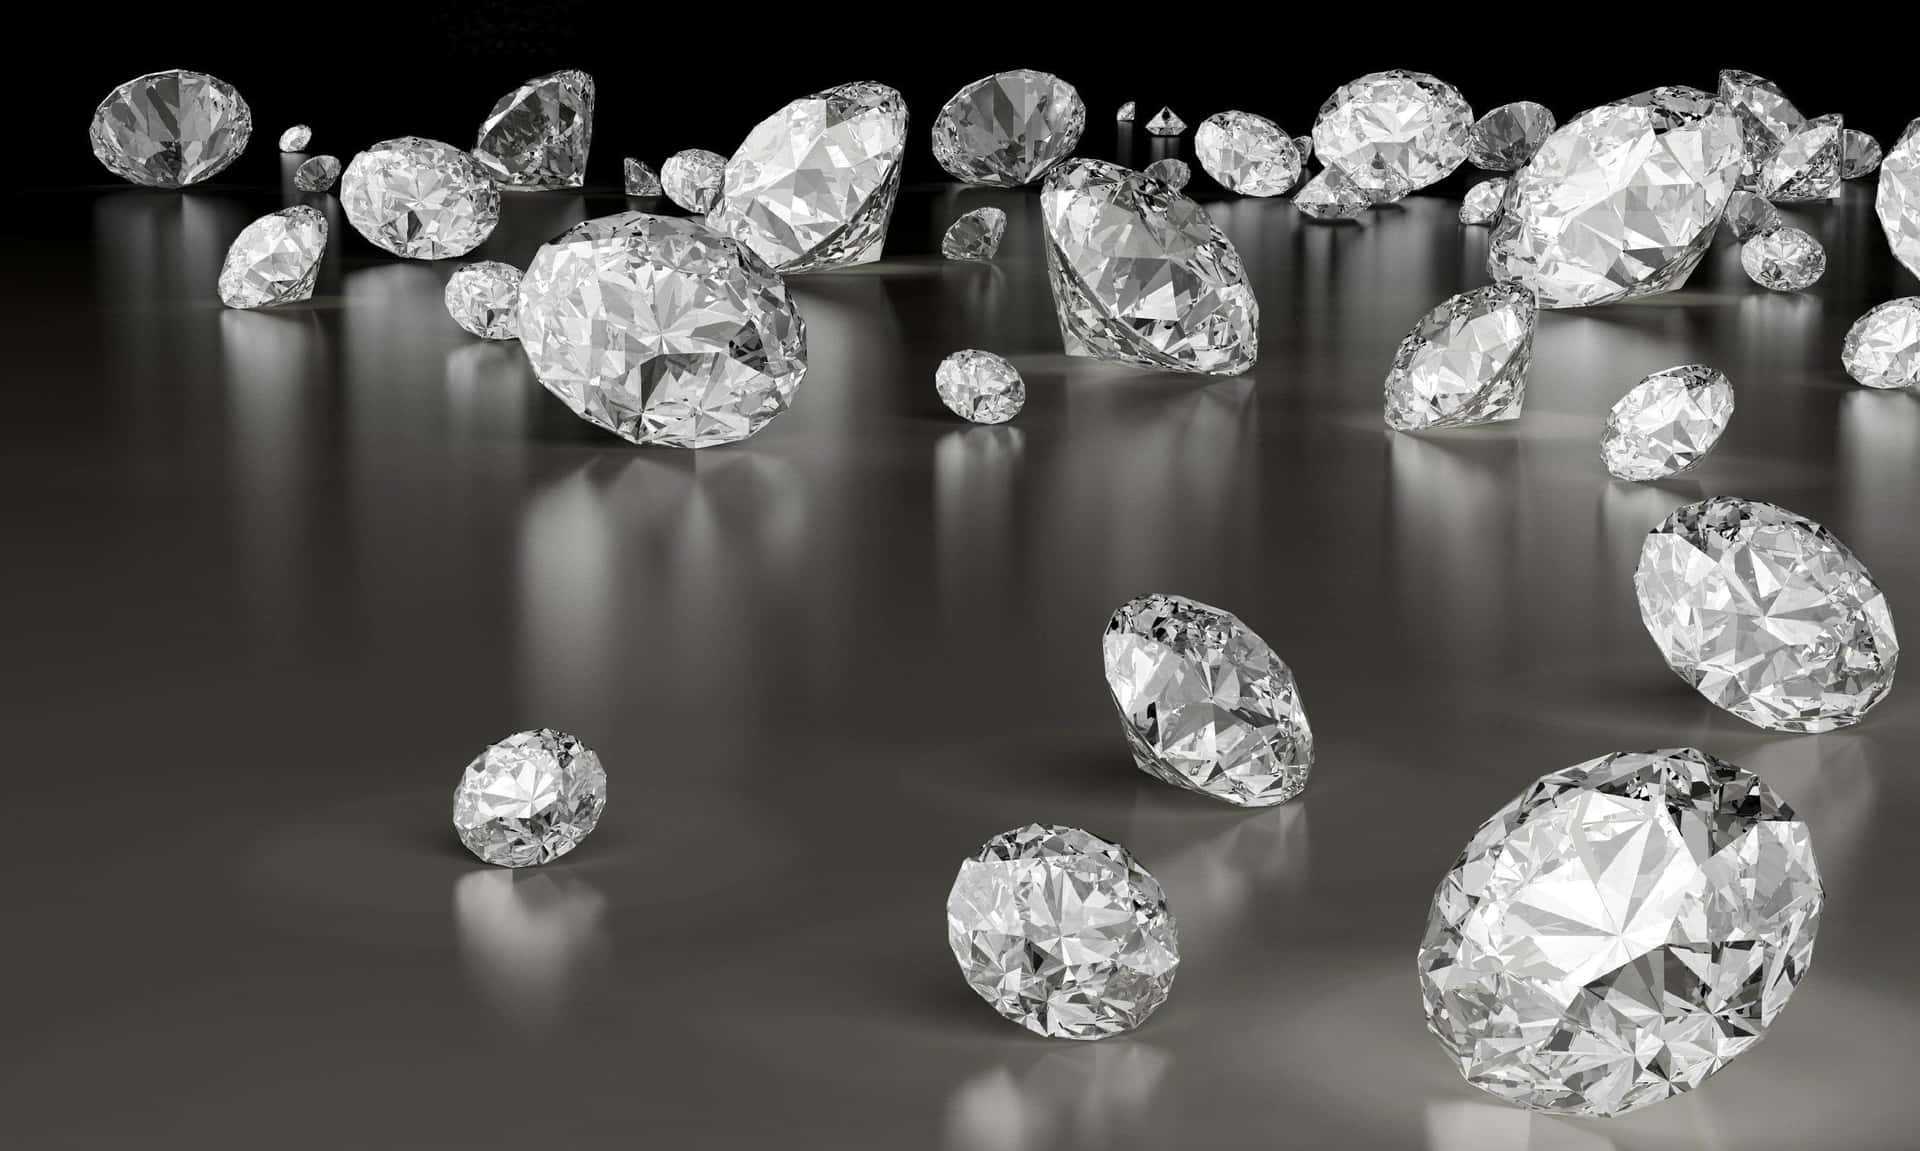 A dazzling view of a diamond glittering in the light